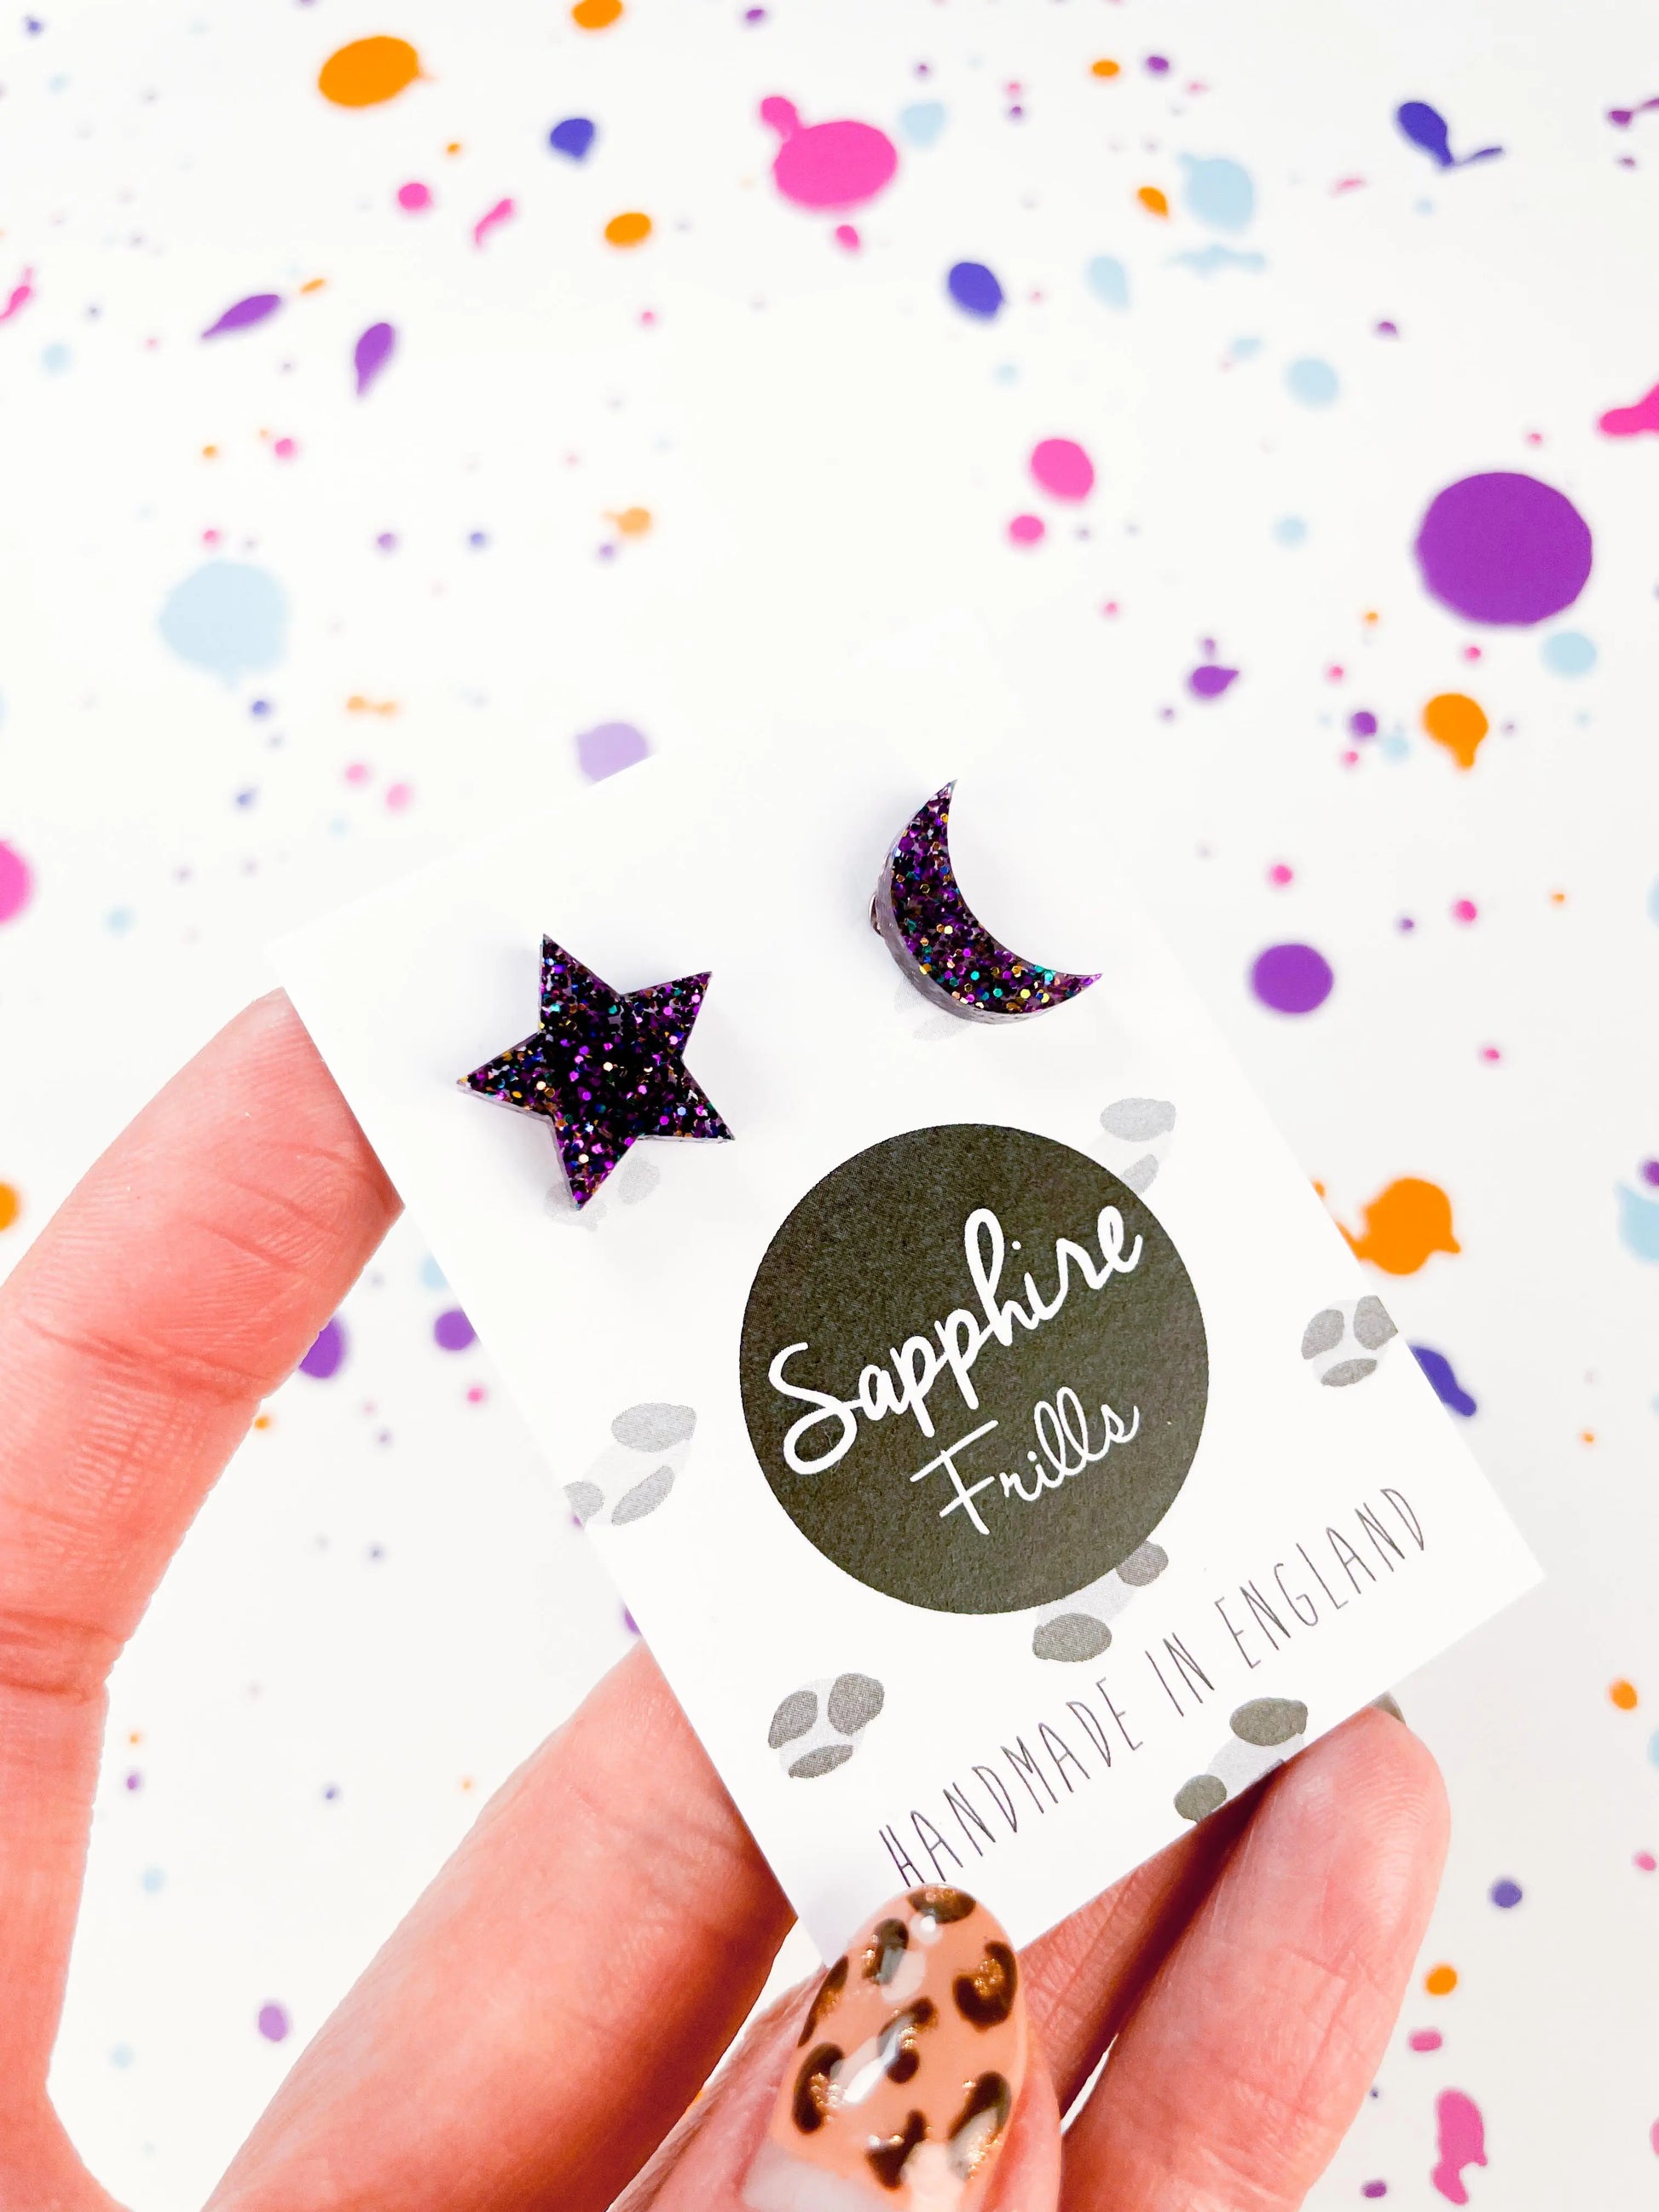 Small Grape Glitter Acrylic Mismatch Star and Moon Studs from Sapphire Frills